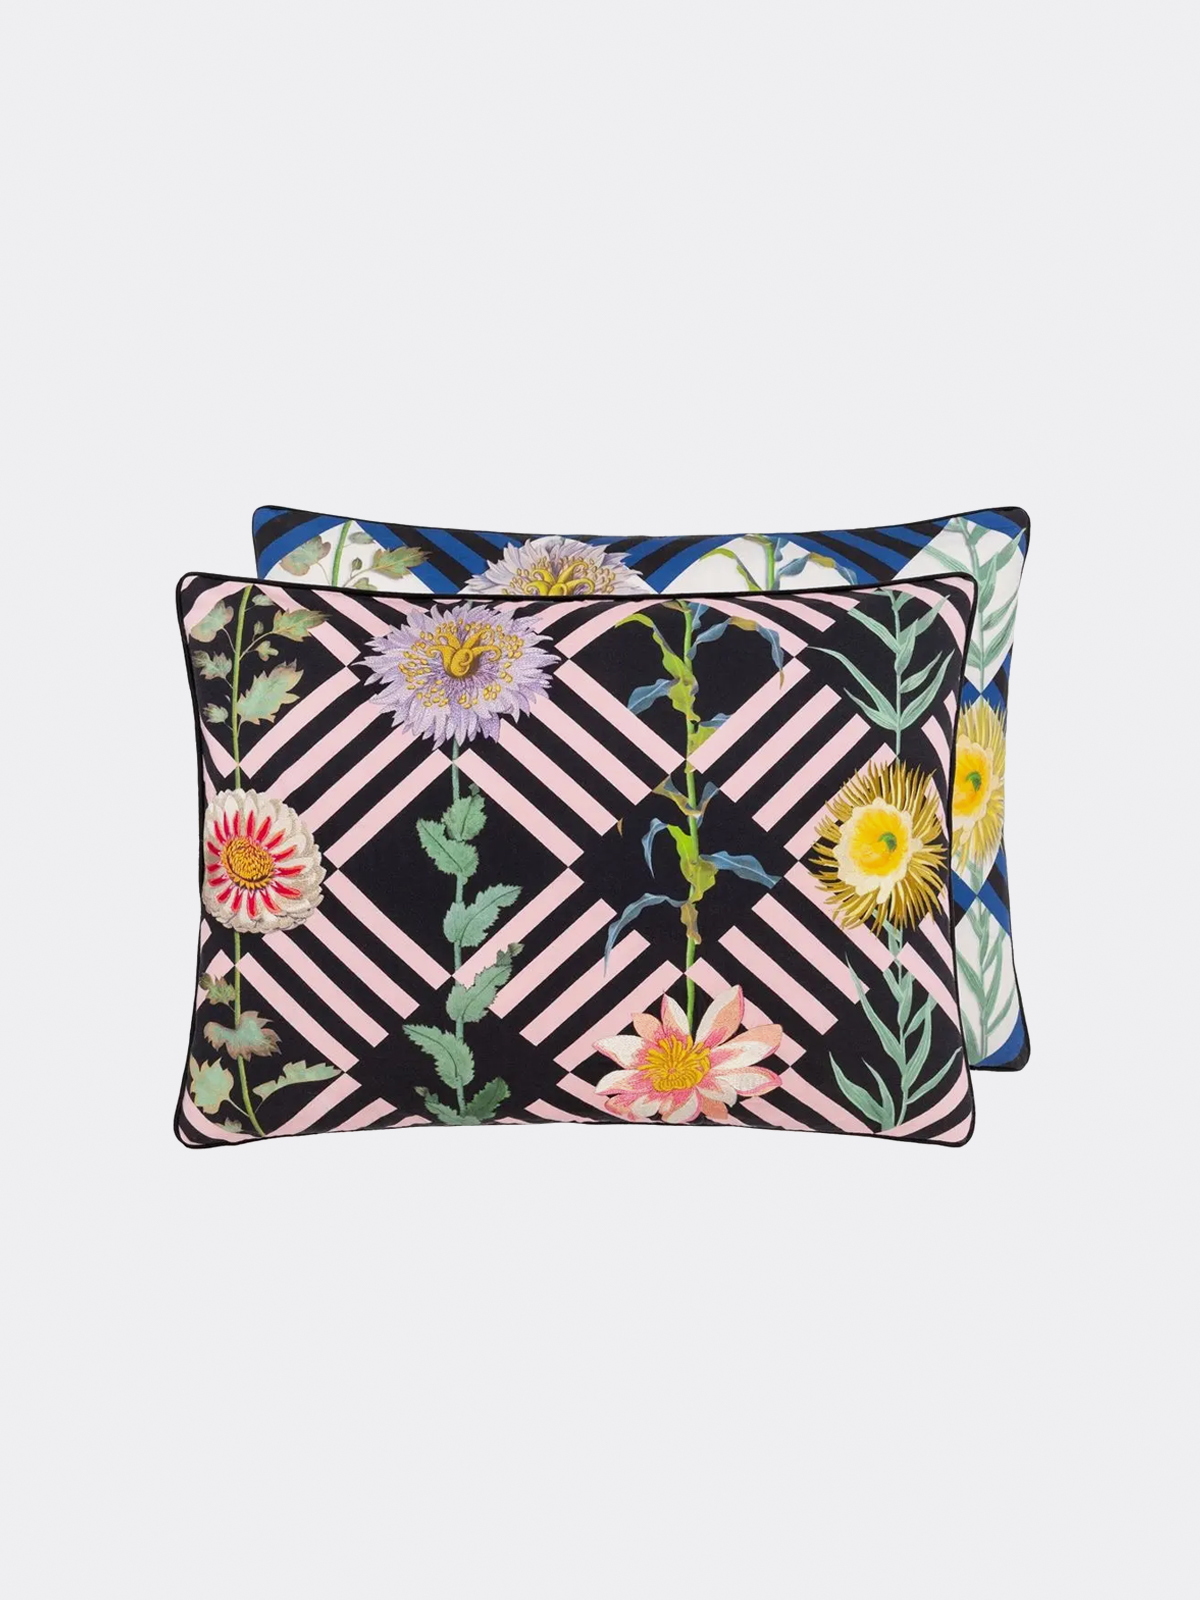  Christian Lacroix Chequerboard Style Satin Cushion Pattern Floral Theme With Feather Filling